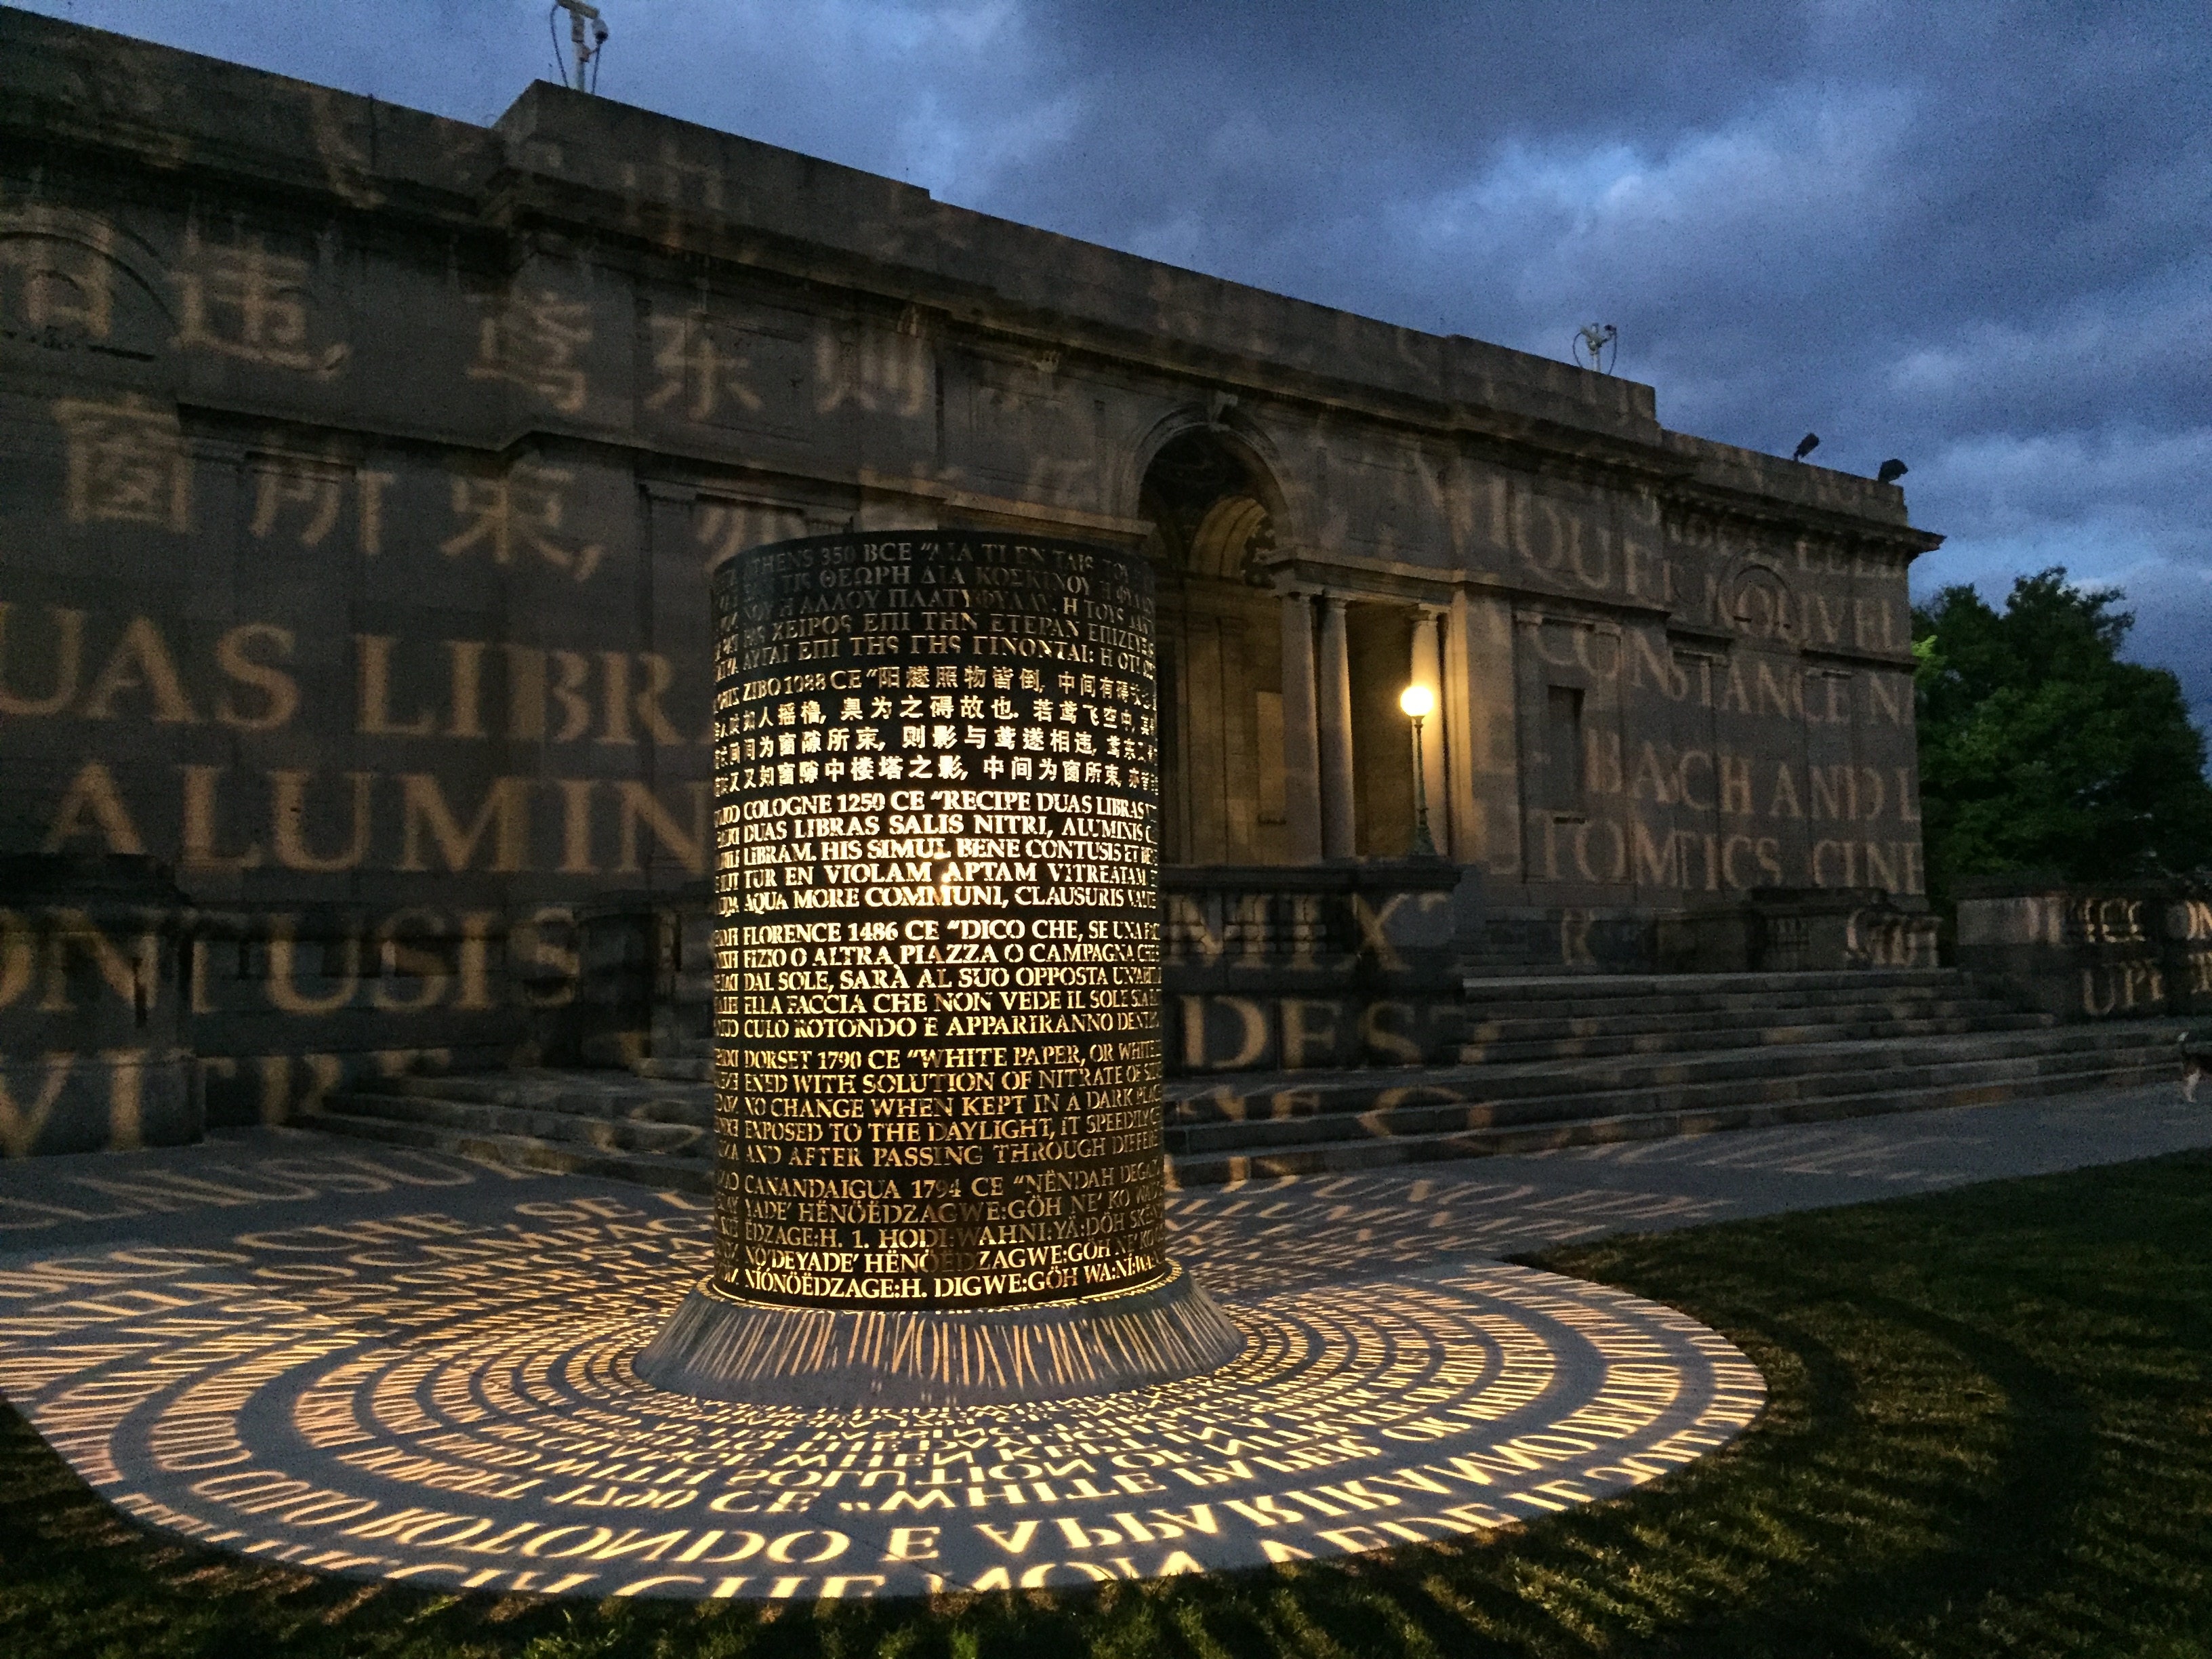 multilingual light-up projected text display outside old building